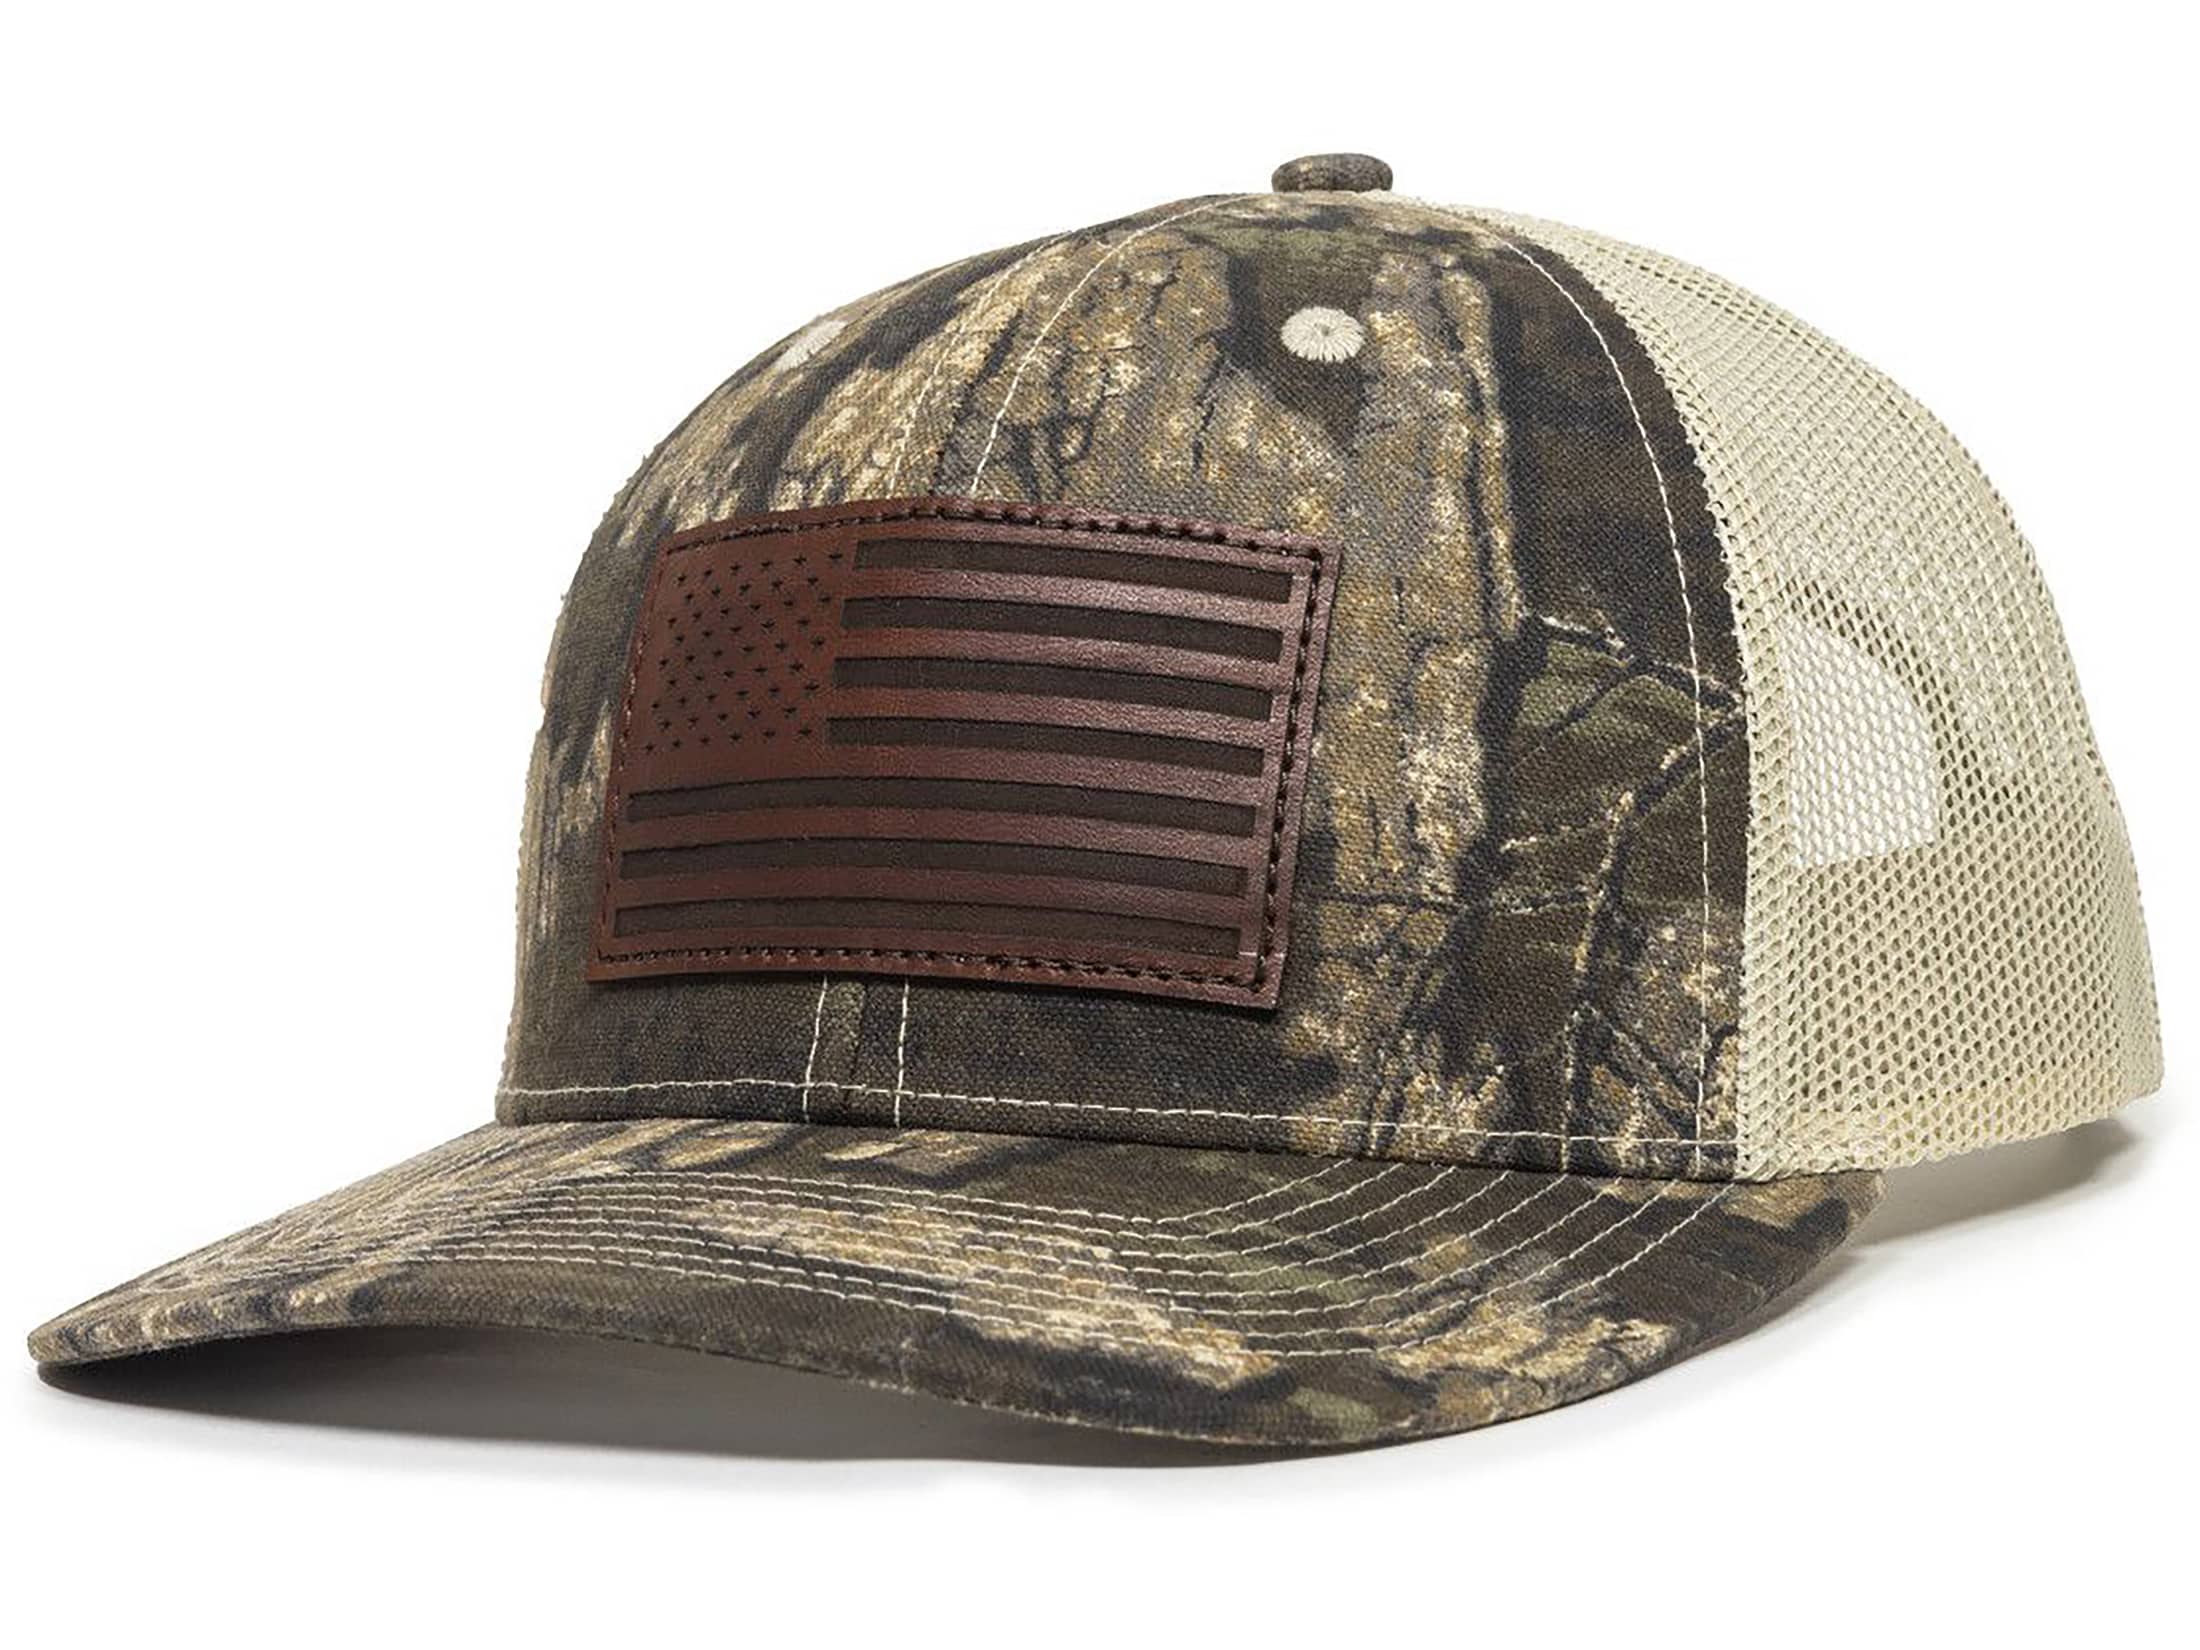 Realtree Men's Camo Flag Hat Realtree Timber/Tan One Size Fits Most